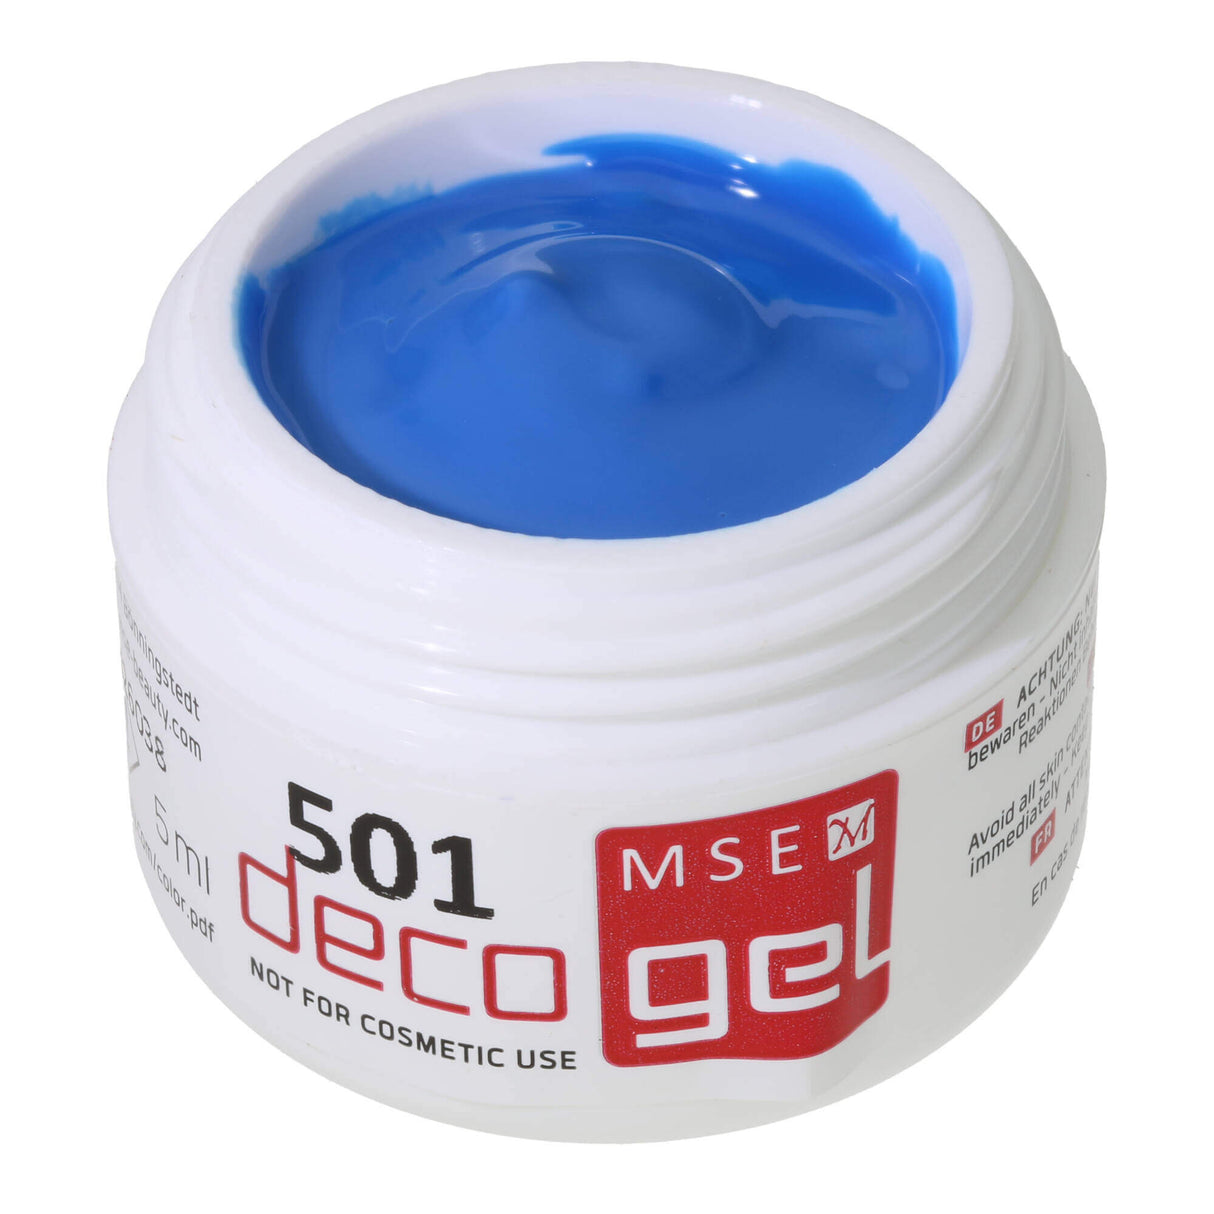 # 501 Premium-DECO Color Gel 5ml Neon Blue NOT FOR COSMETIC USE